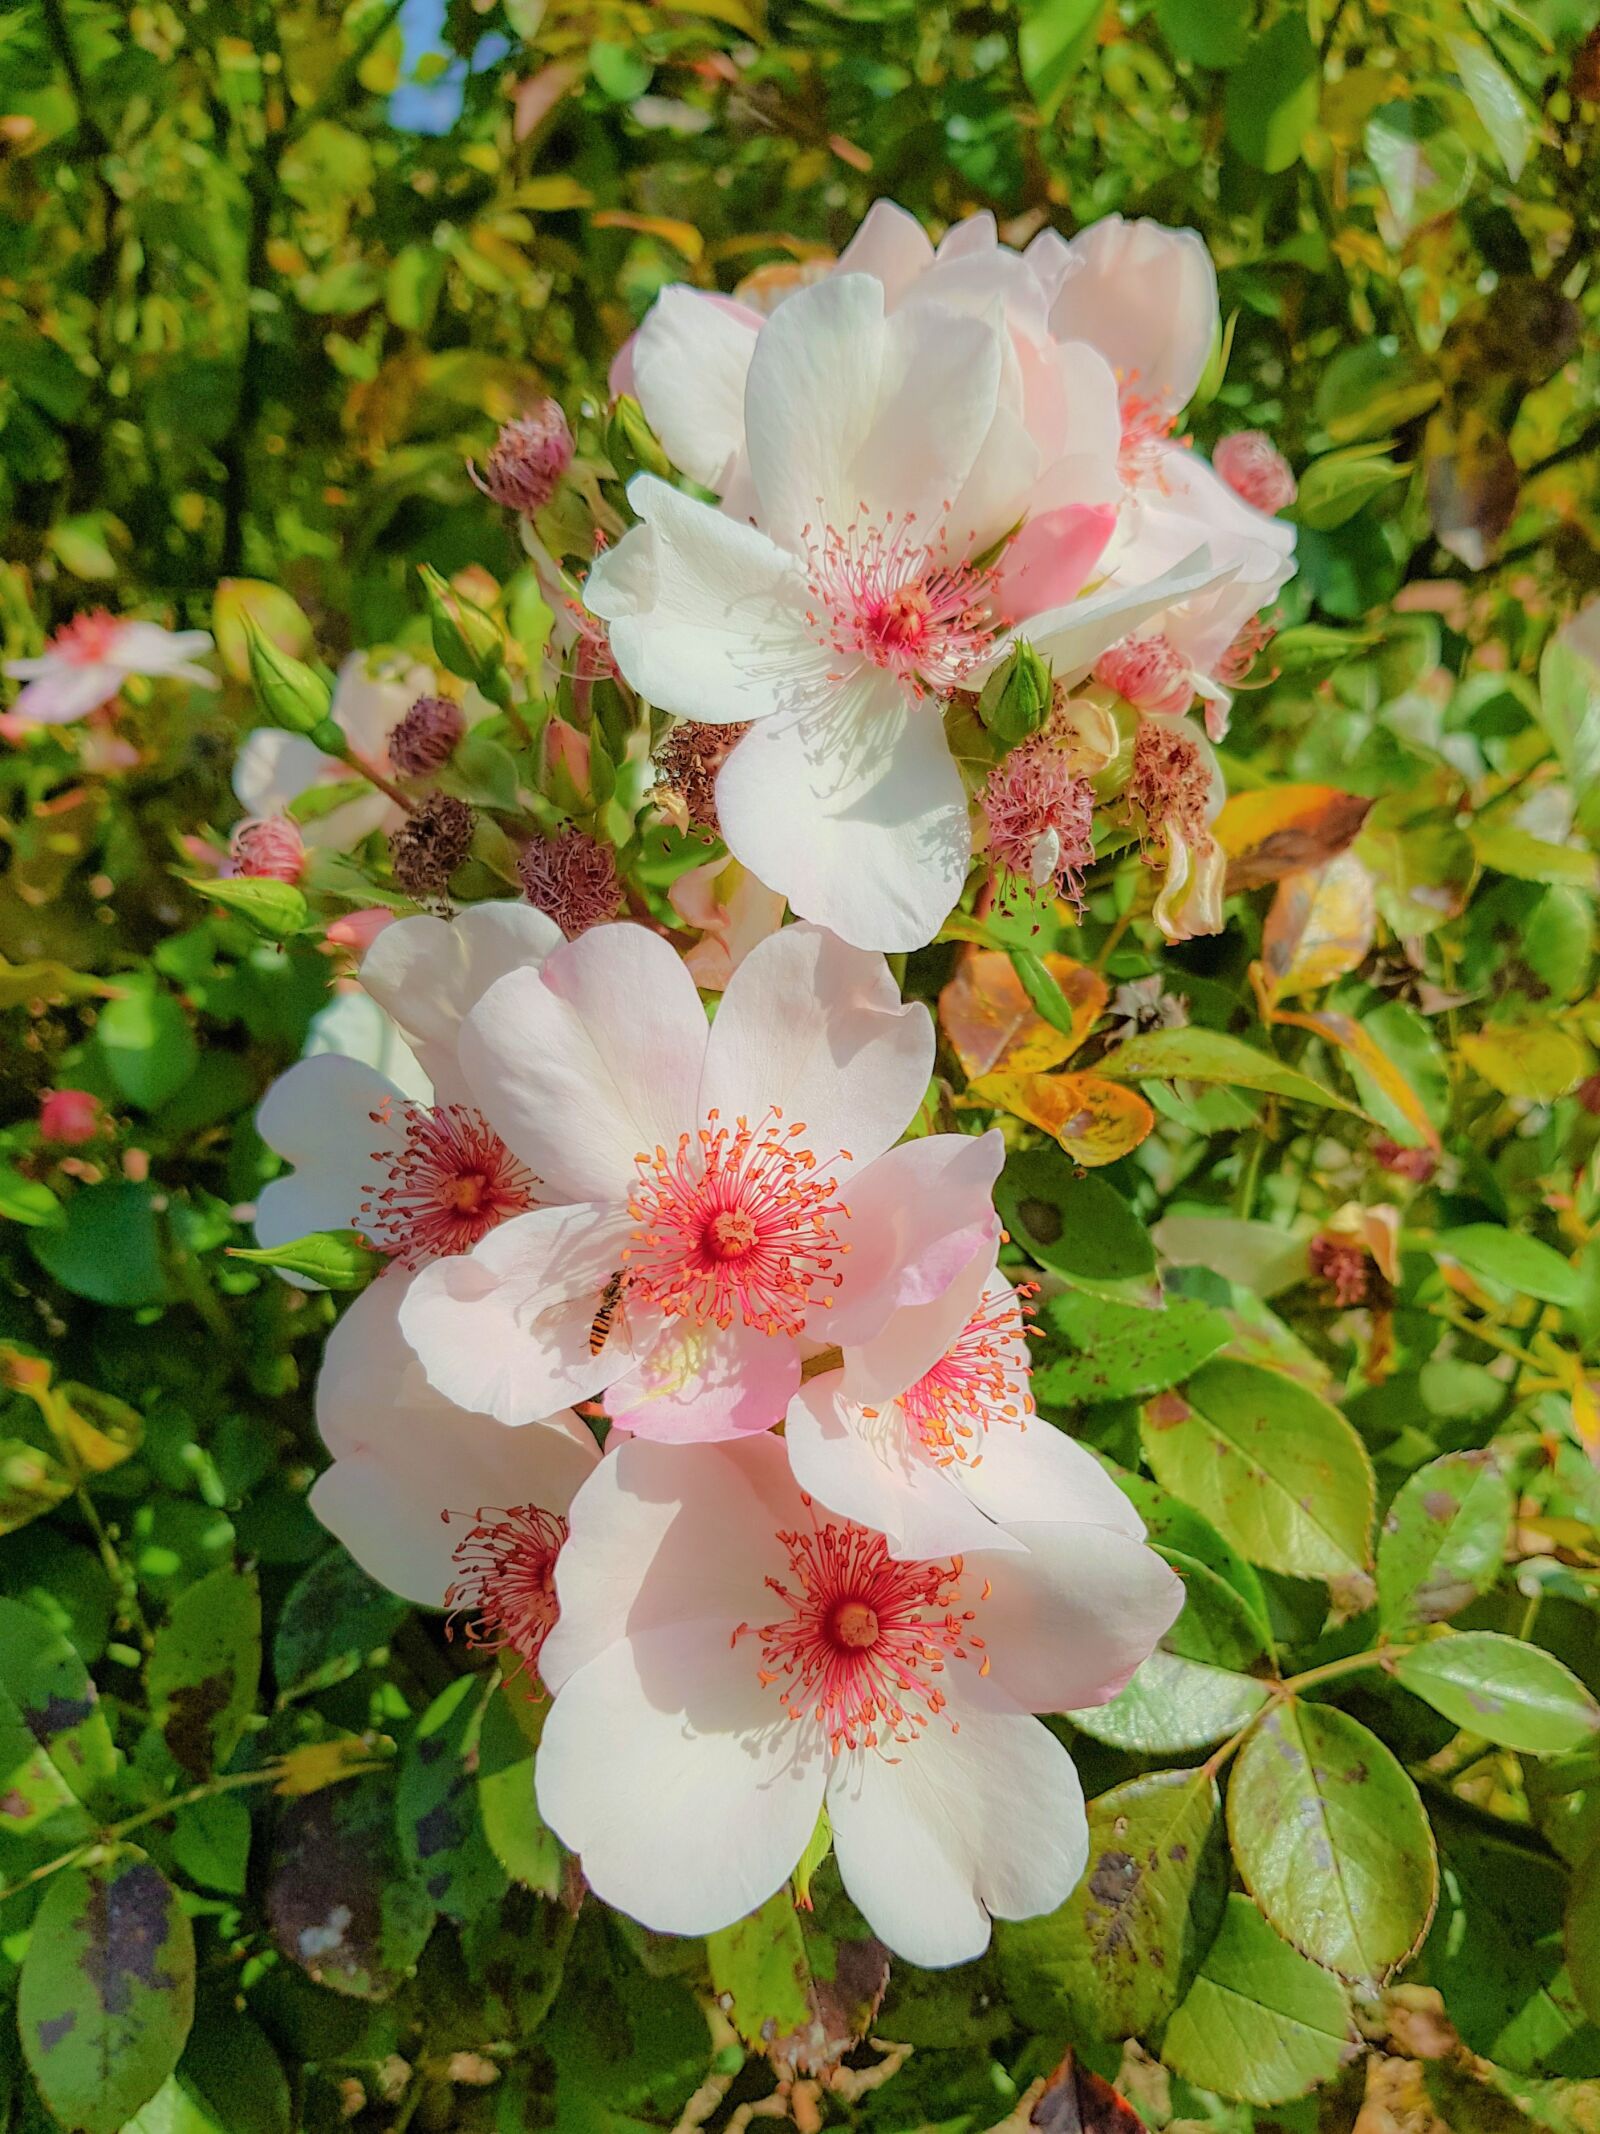 Samsung SM-G955F + Samsung Galaxy S8+ Rear Camera sample photo. Flowers, white flowers, nature photography